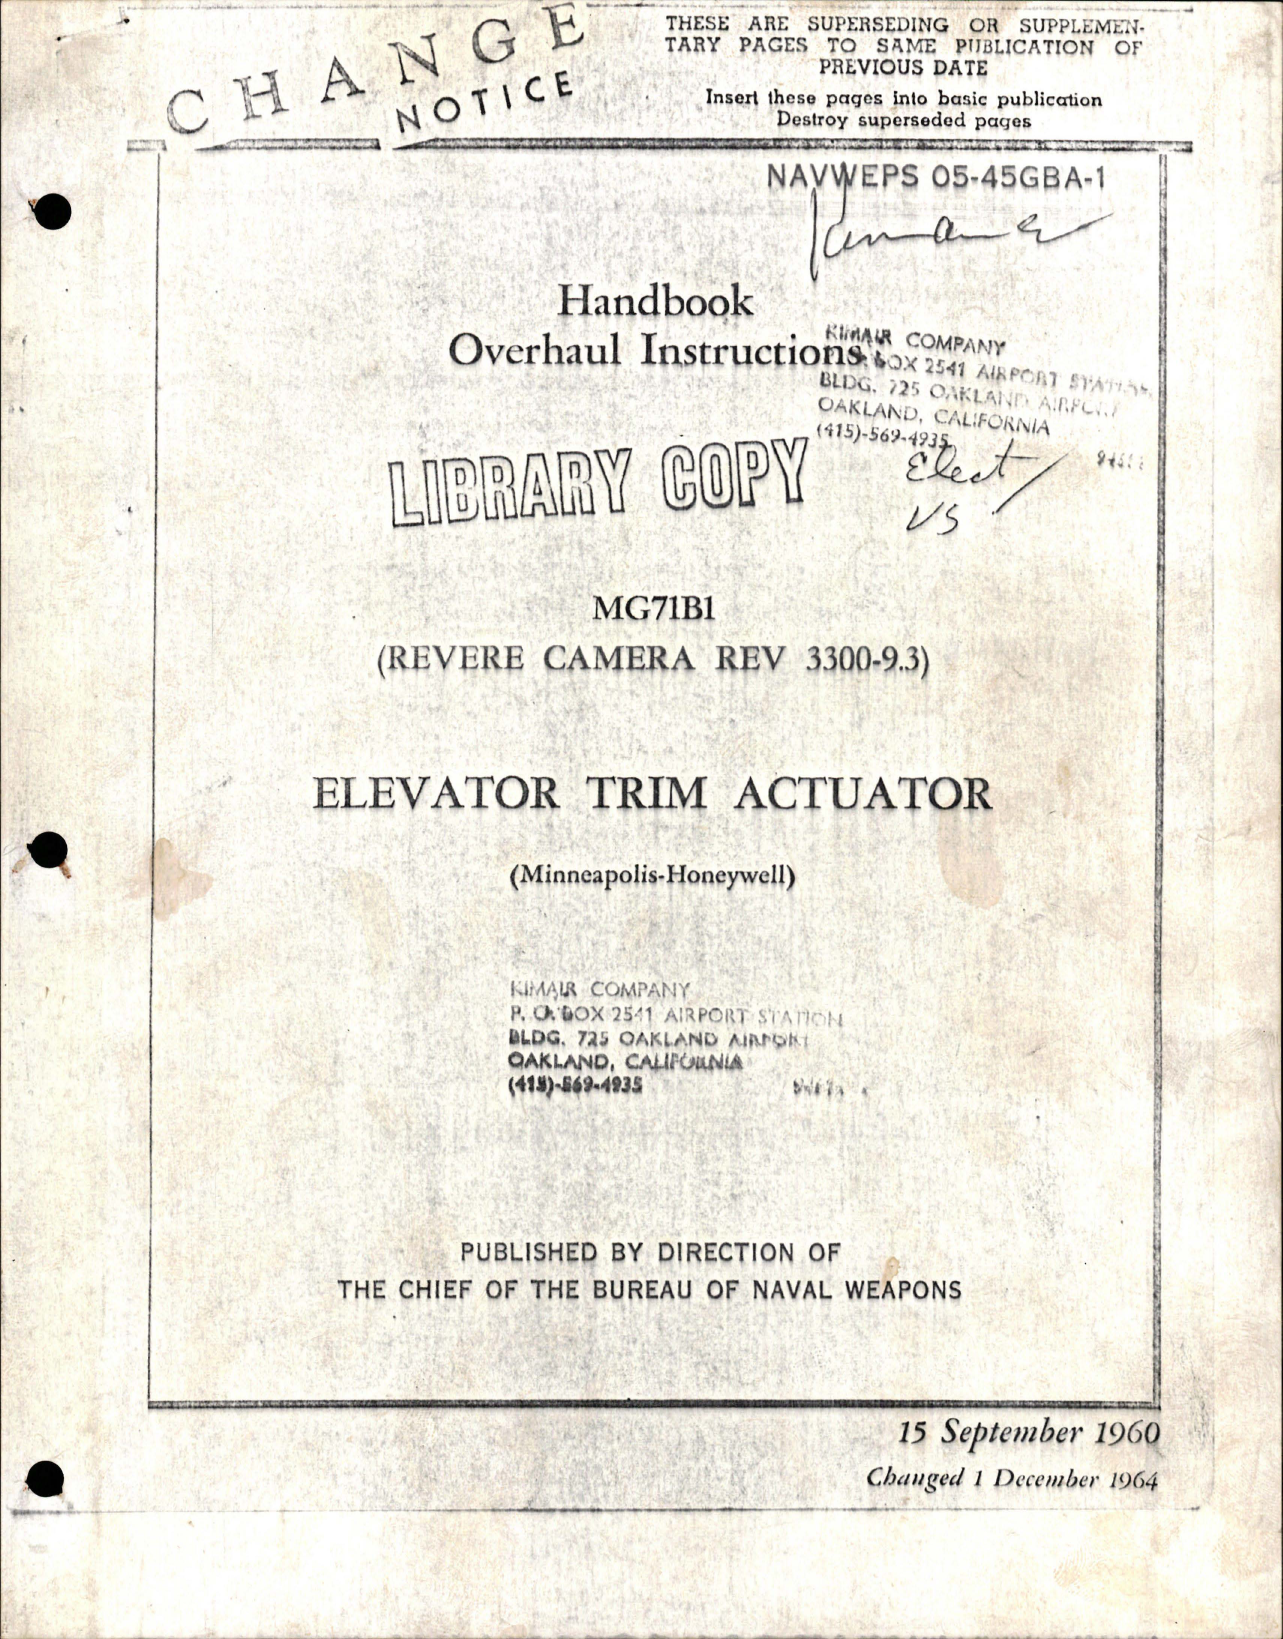 Sample page 1 from AirCorps Library document: Overhaul Instructions for Elevator Trim Actuator - MG71B1